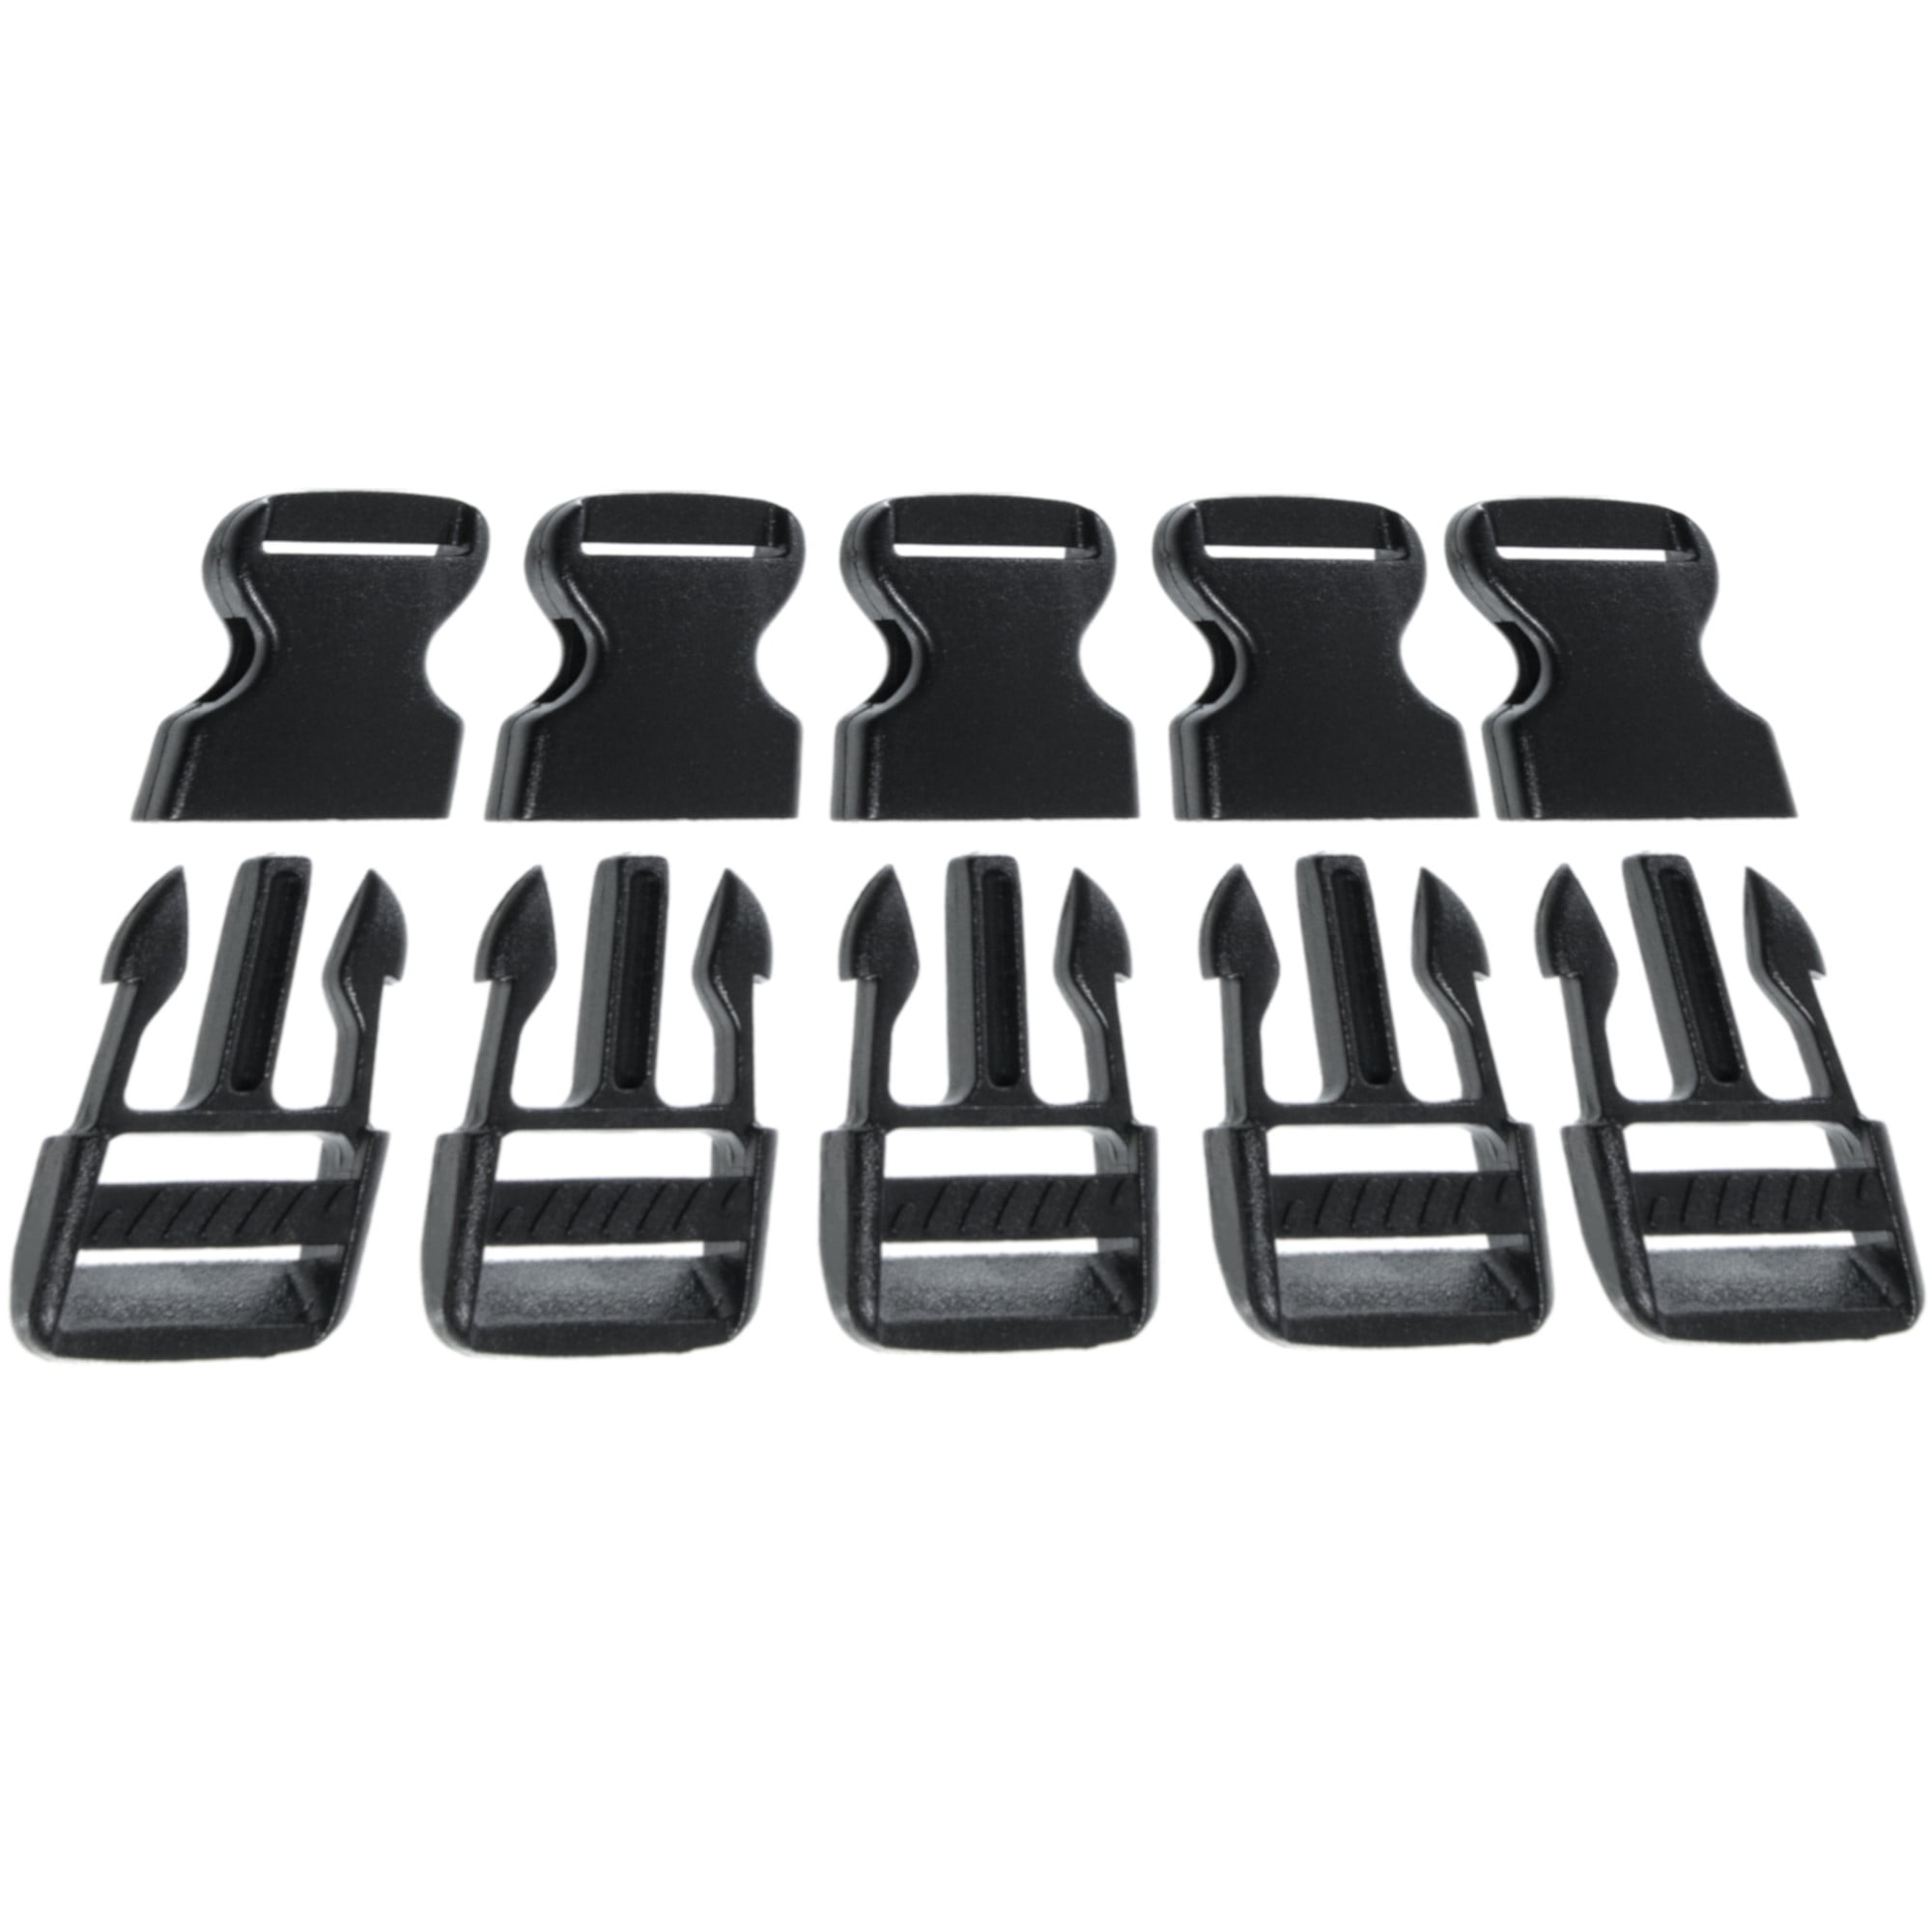 1 Inch Side Release Plastic Black Clip Buckles - 5 Pack USA Made Quick  Locking Clasp